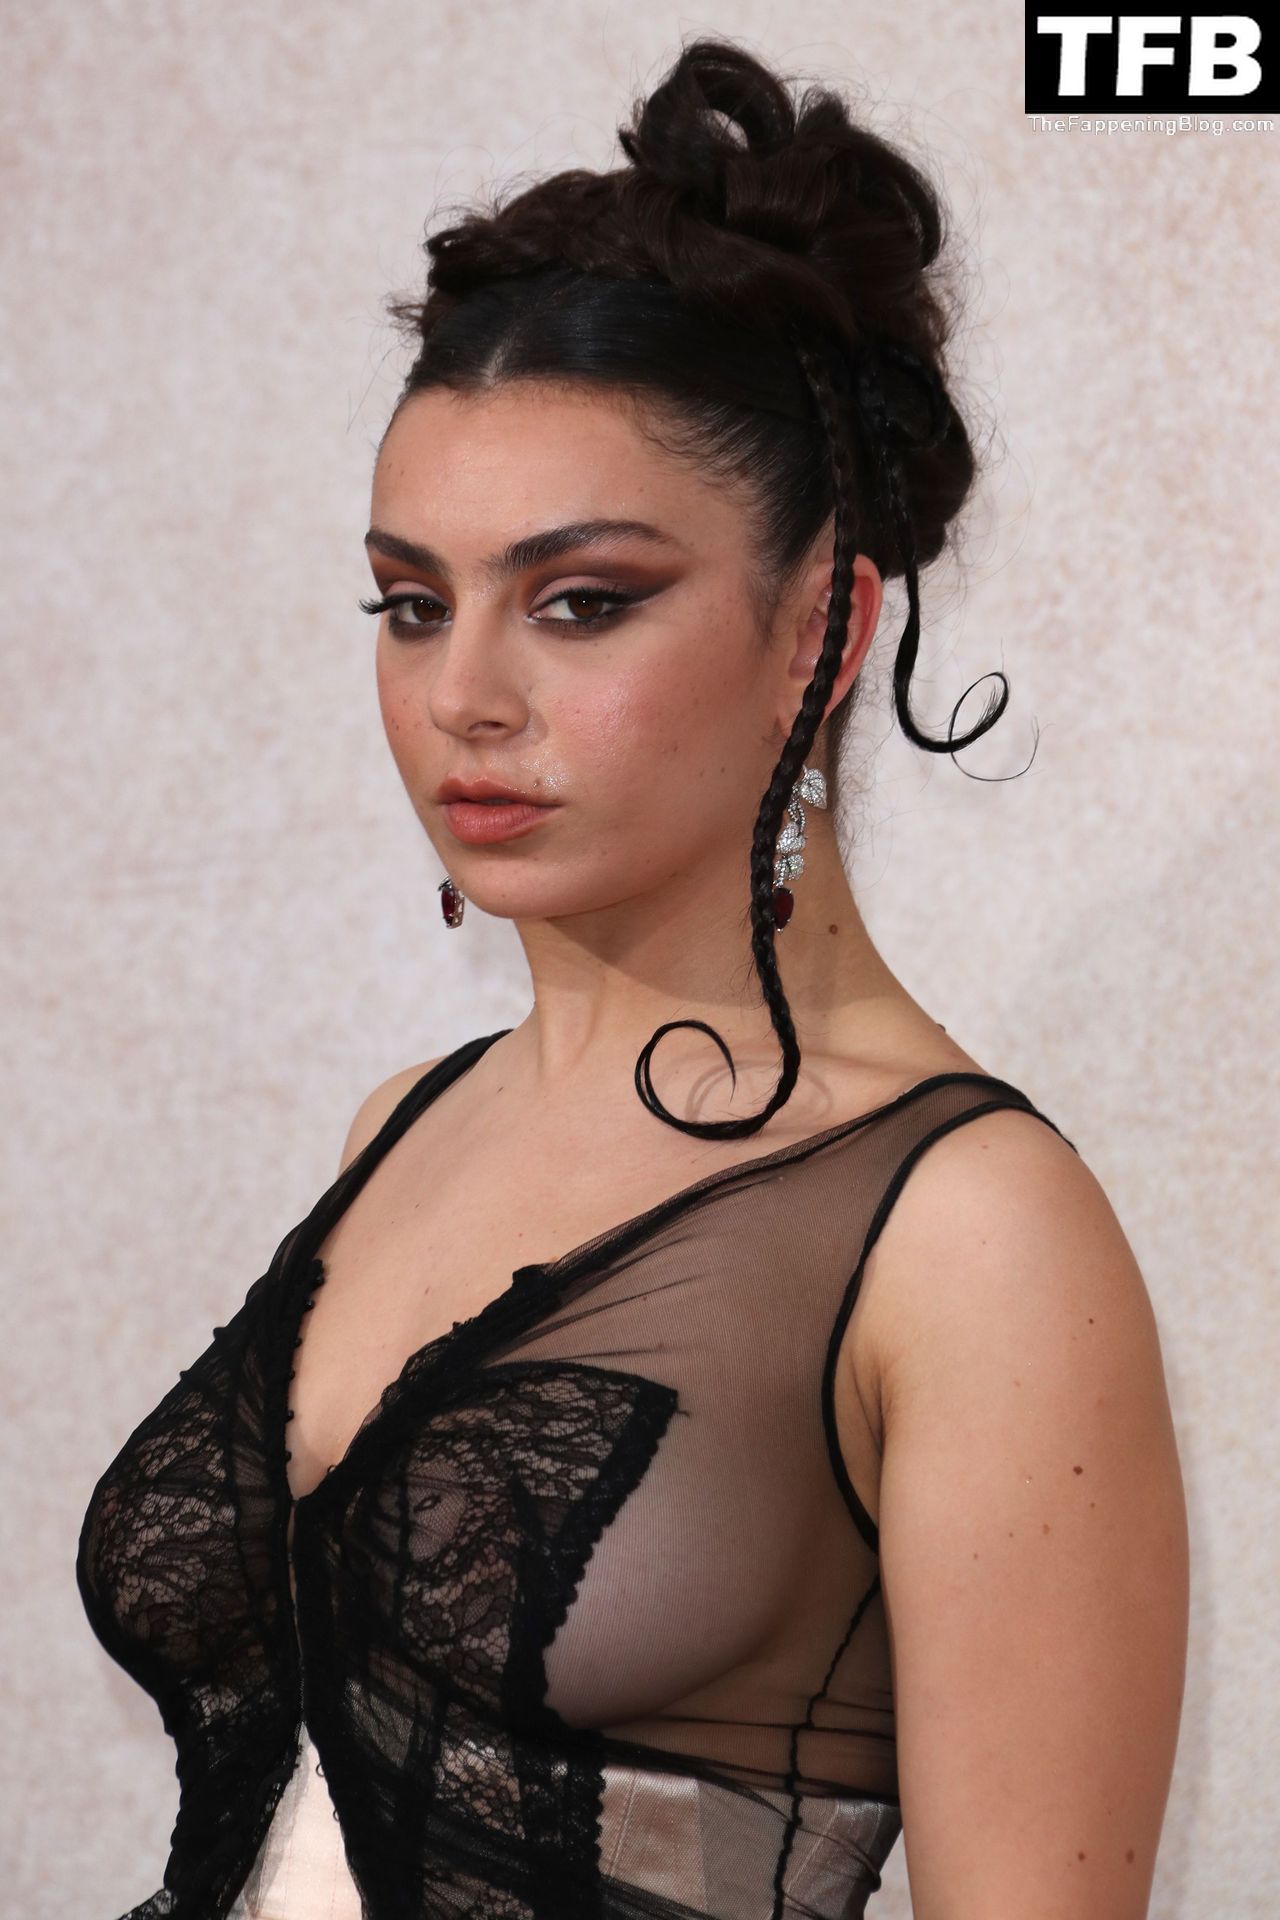 Charli-XCX-See-Through-Nude-new-The-Fappening-Blog-1.jpg